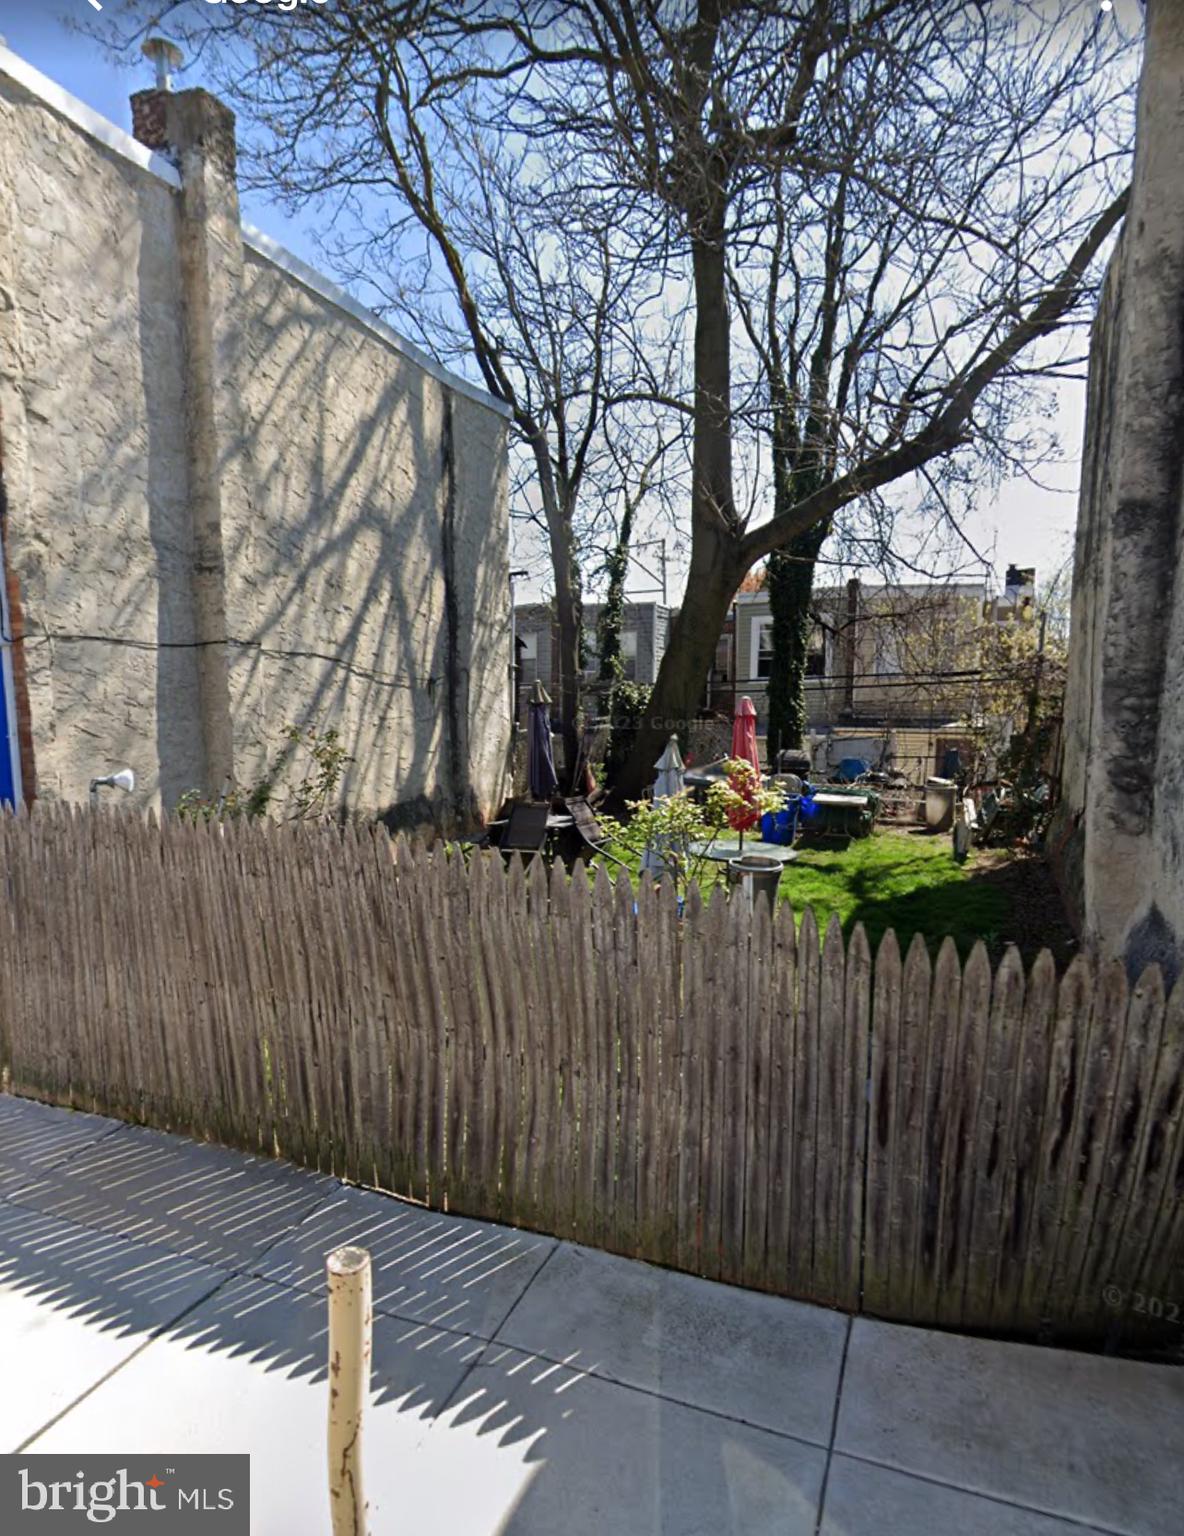 a view of a backyard with wooden fence and a large tree